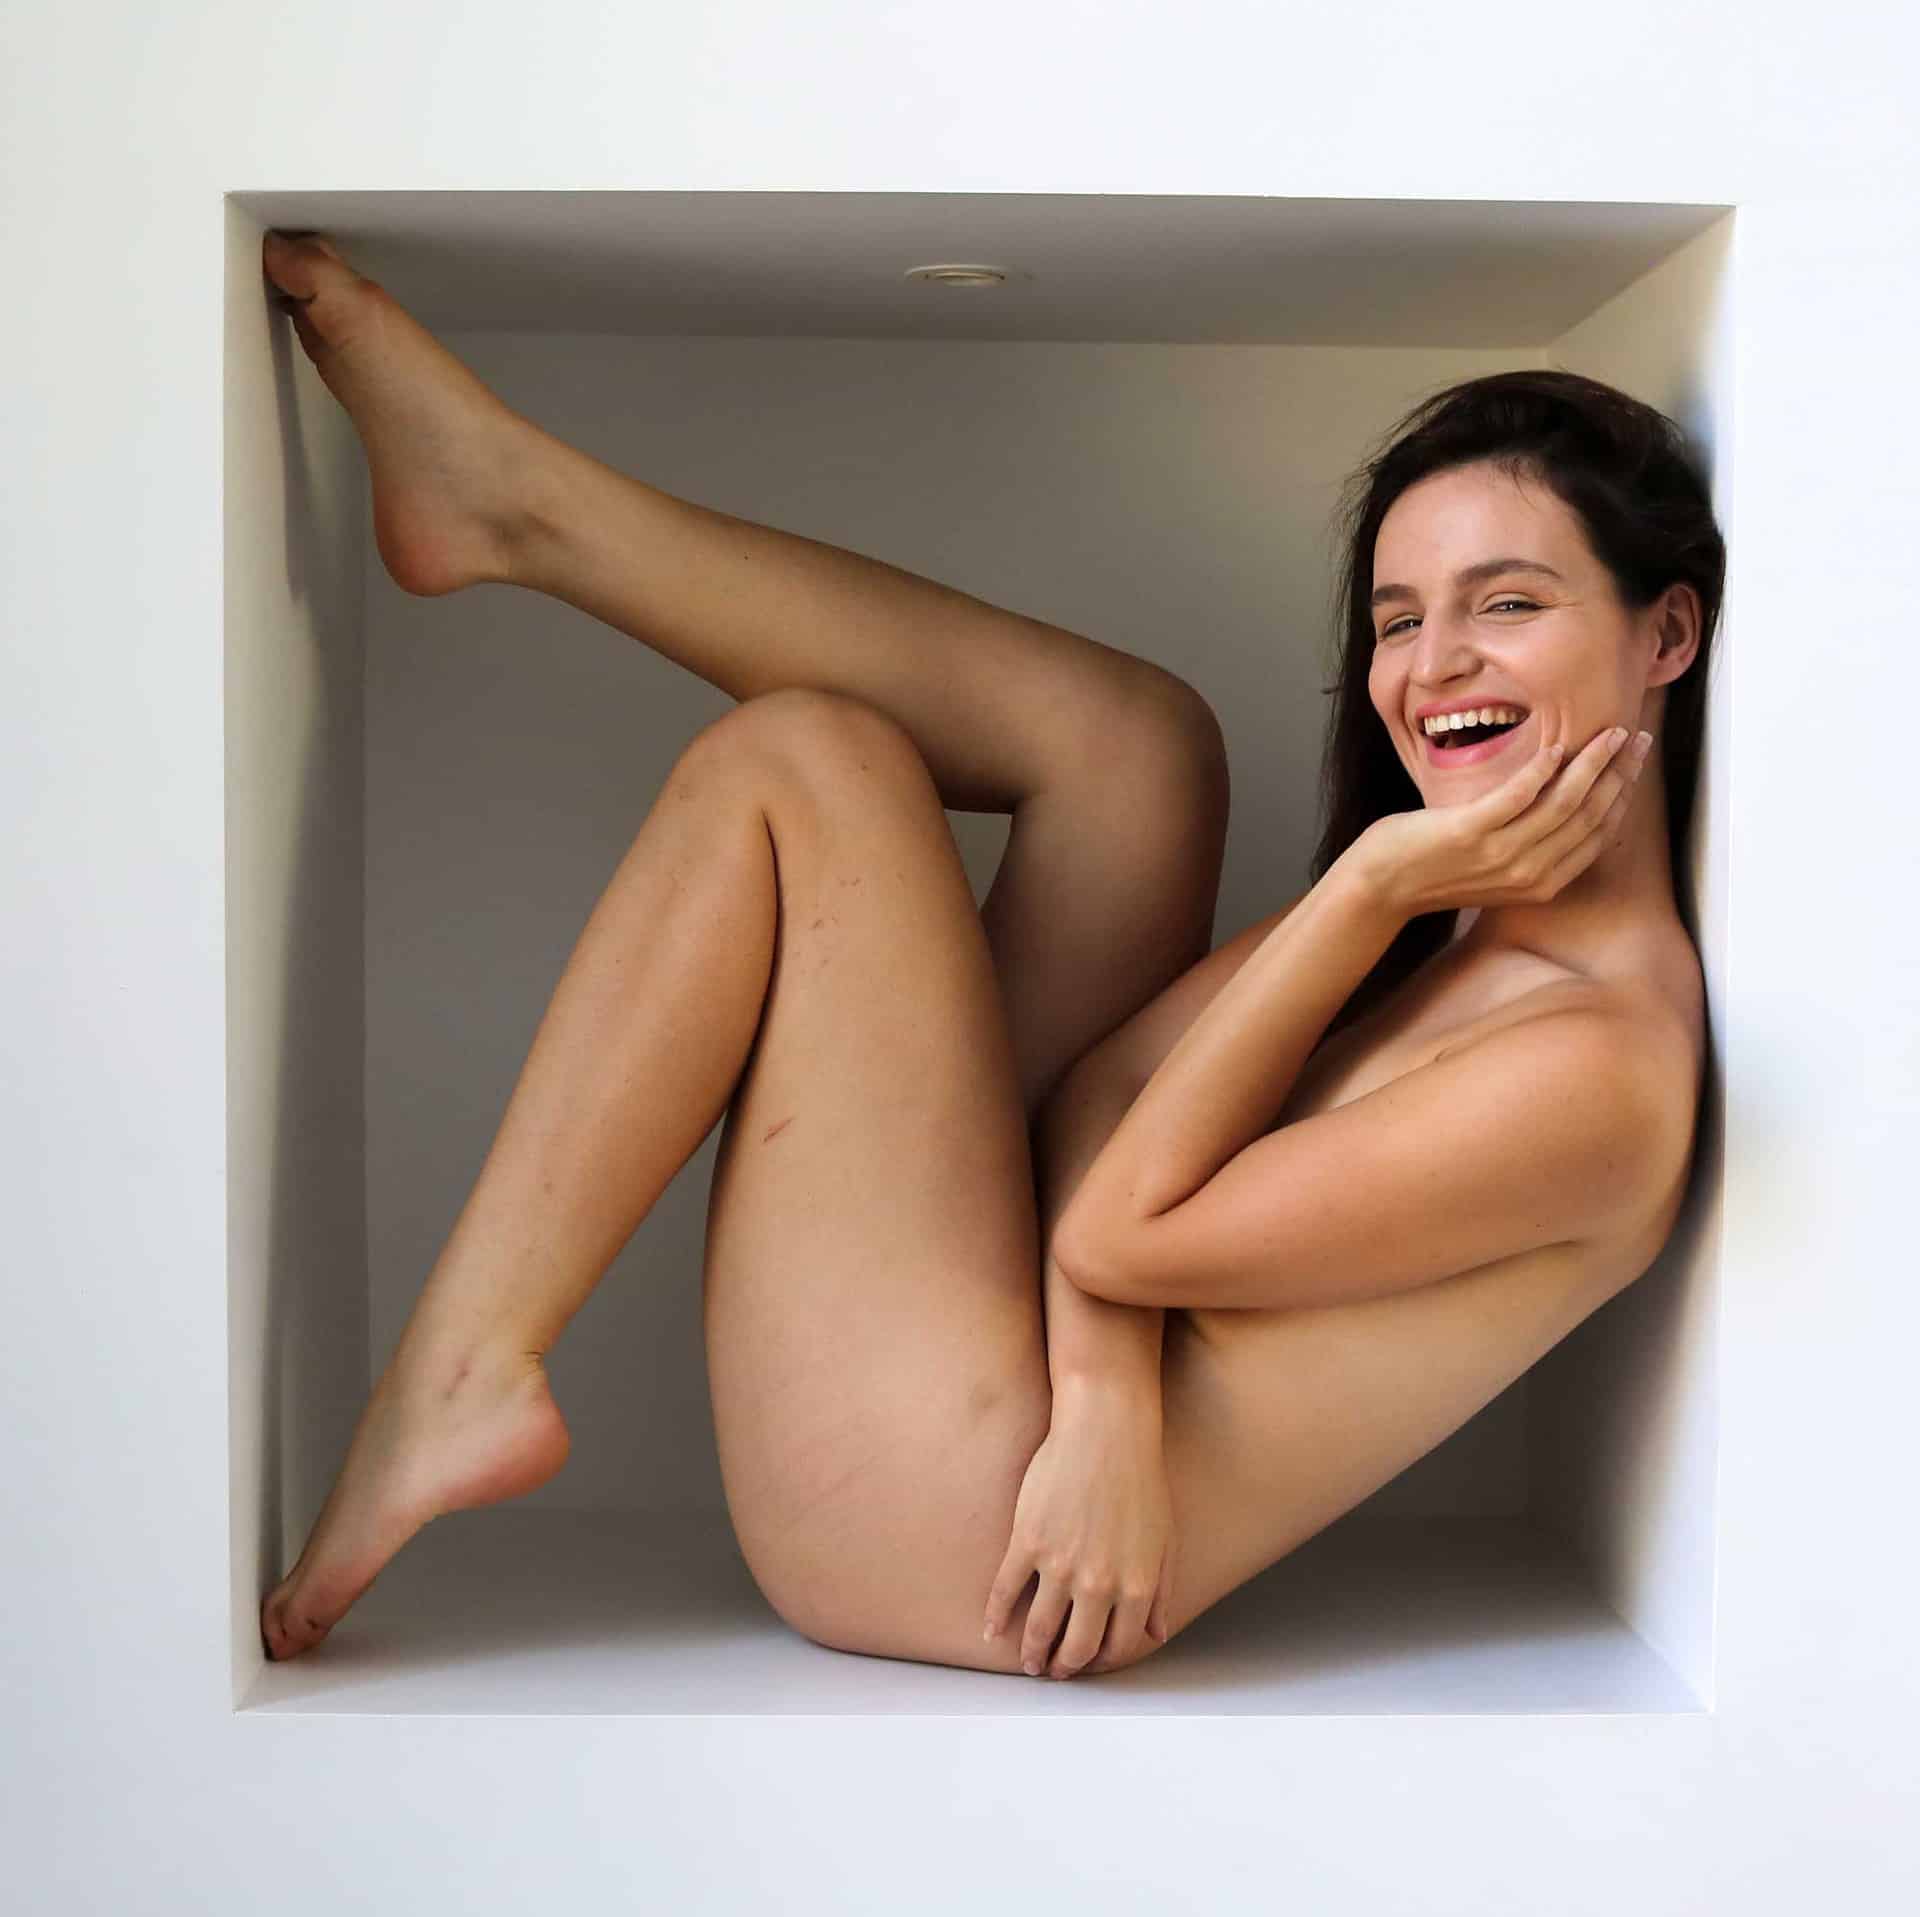 Aim Model laughing in the wall box